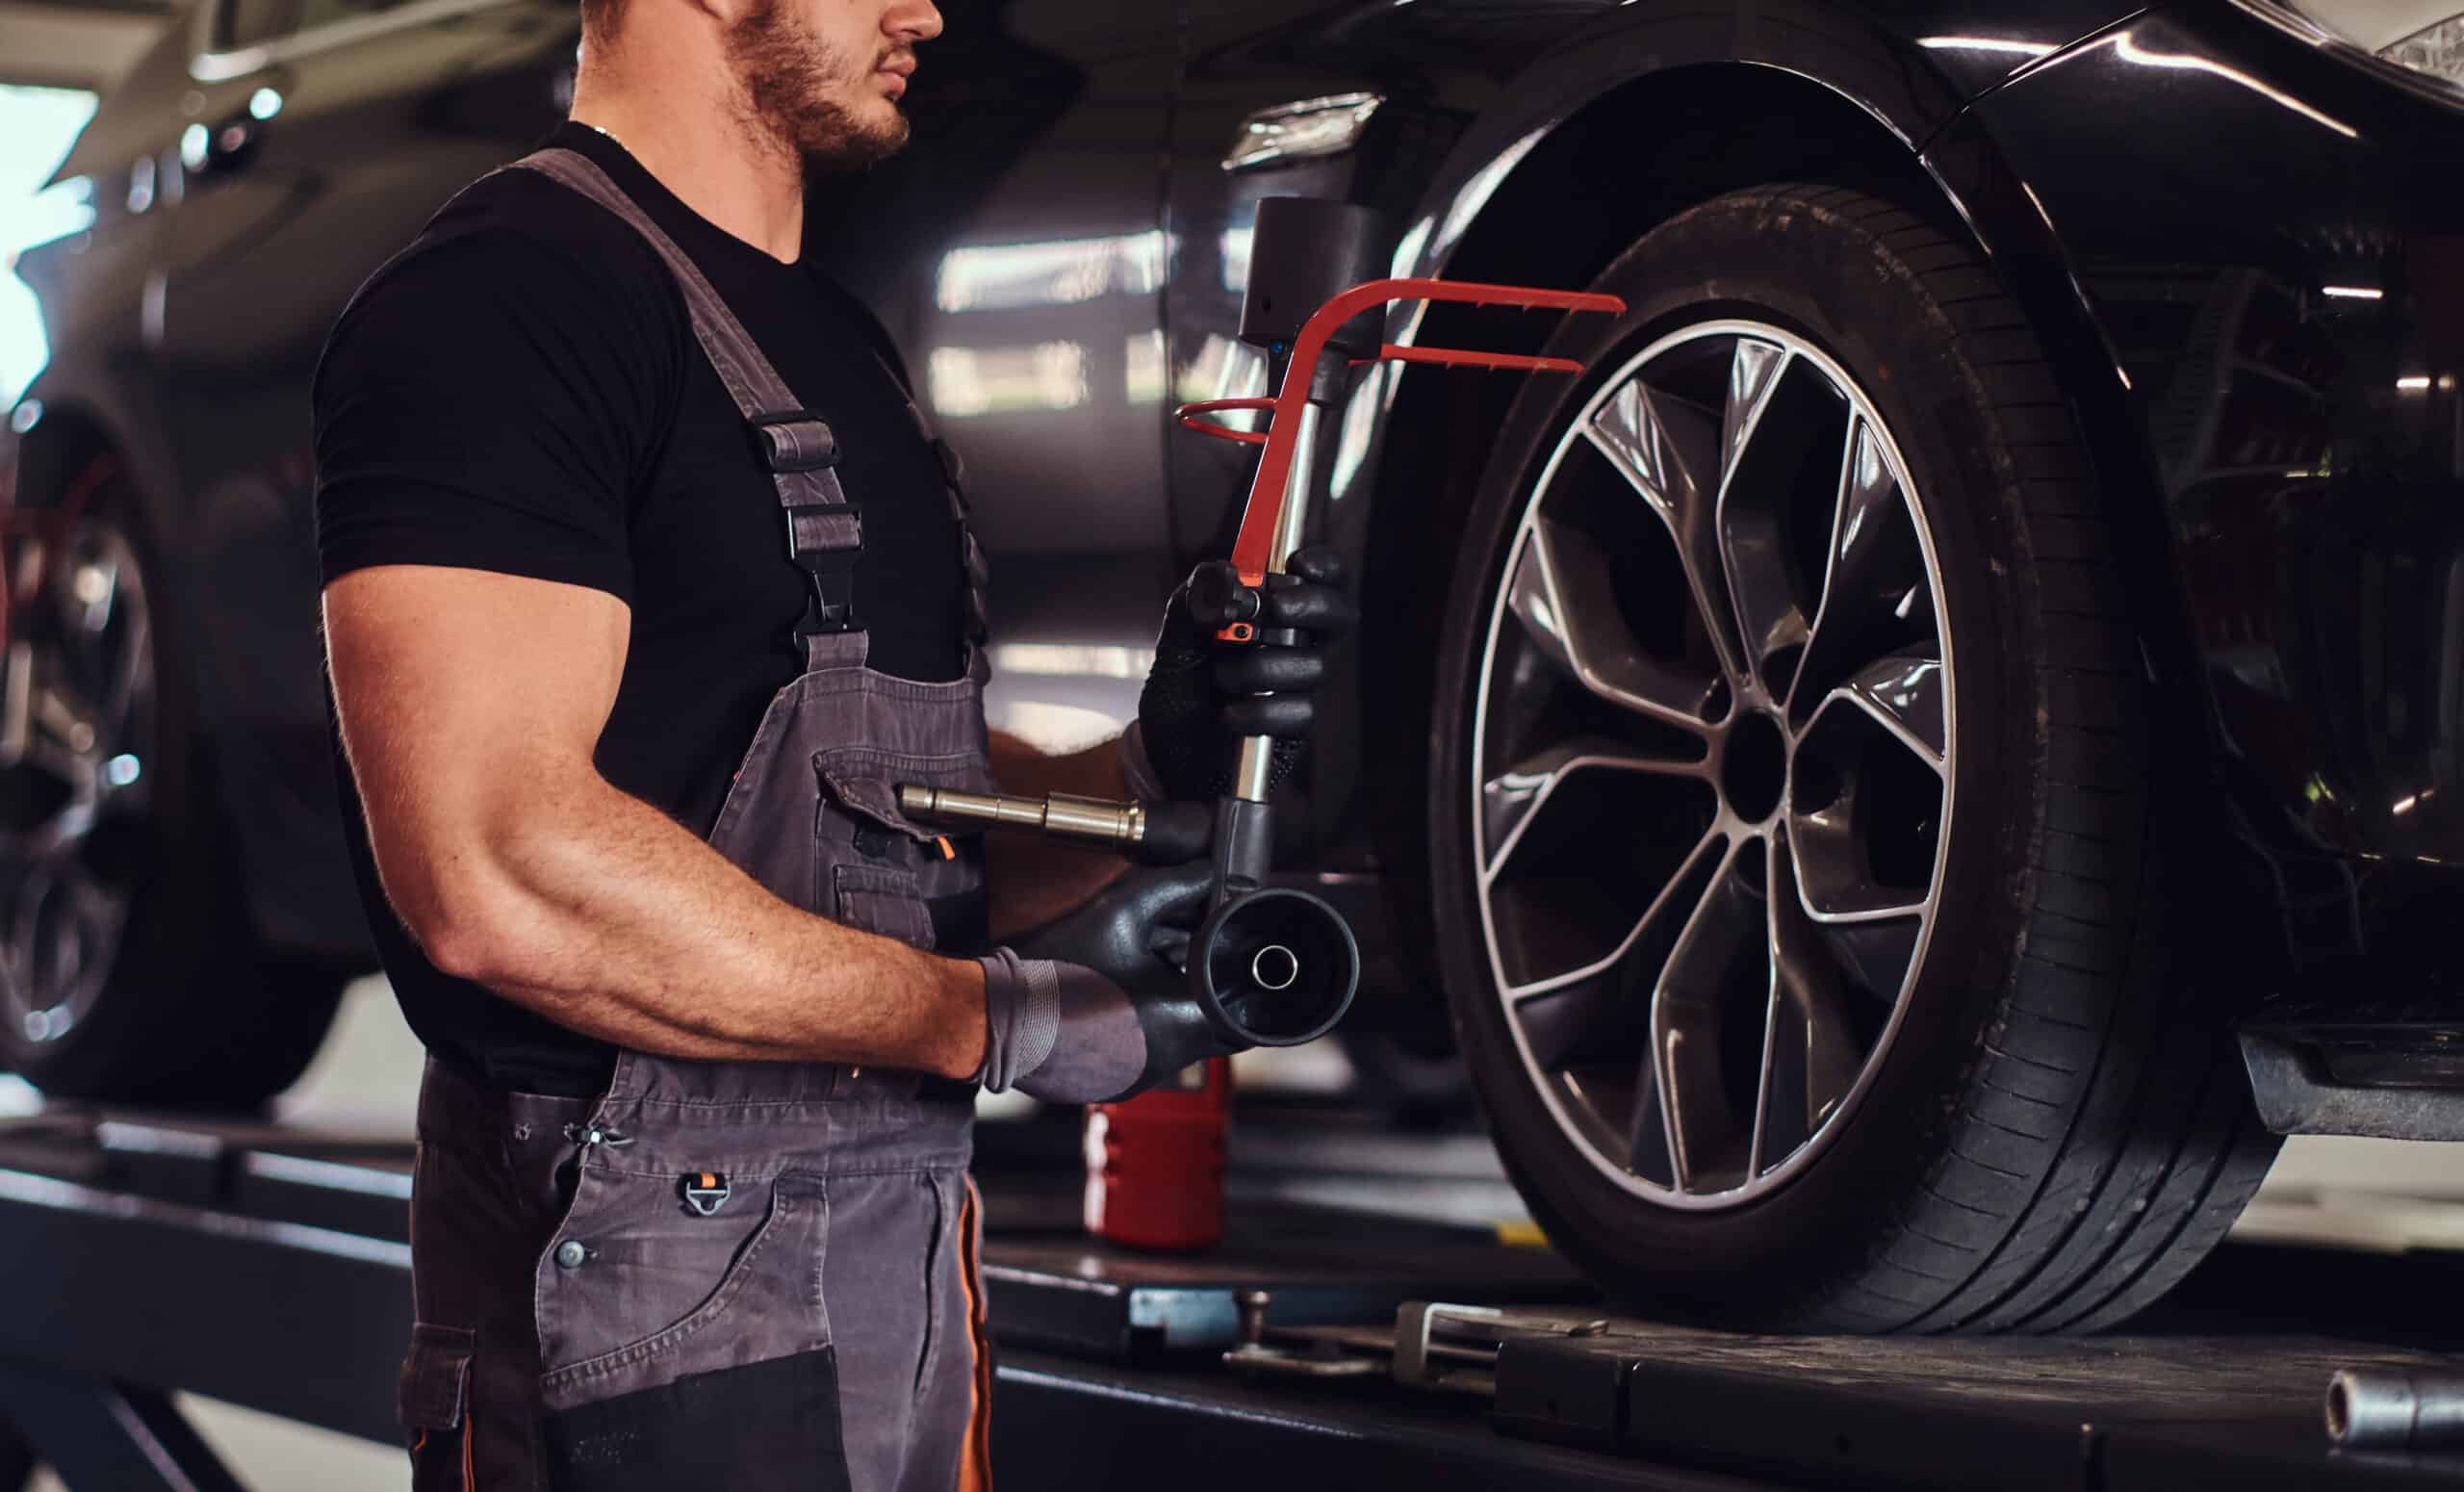 Auto mechanic diligently addressing tire problems by repairing a car tire